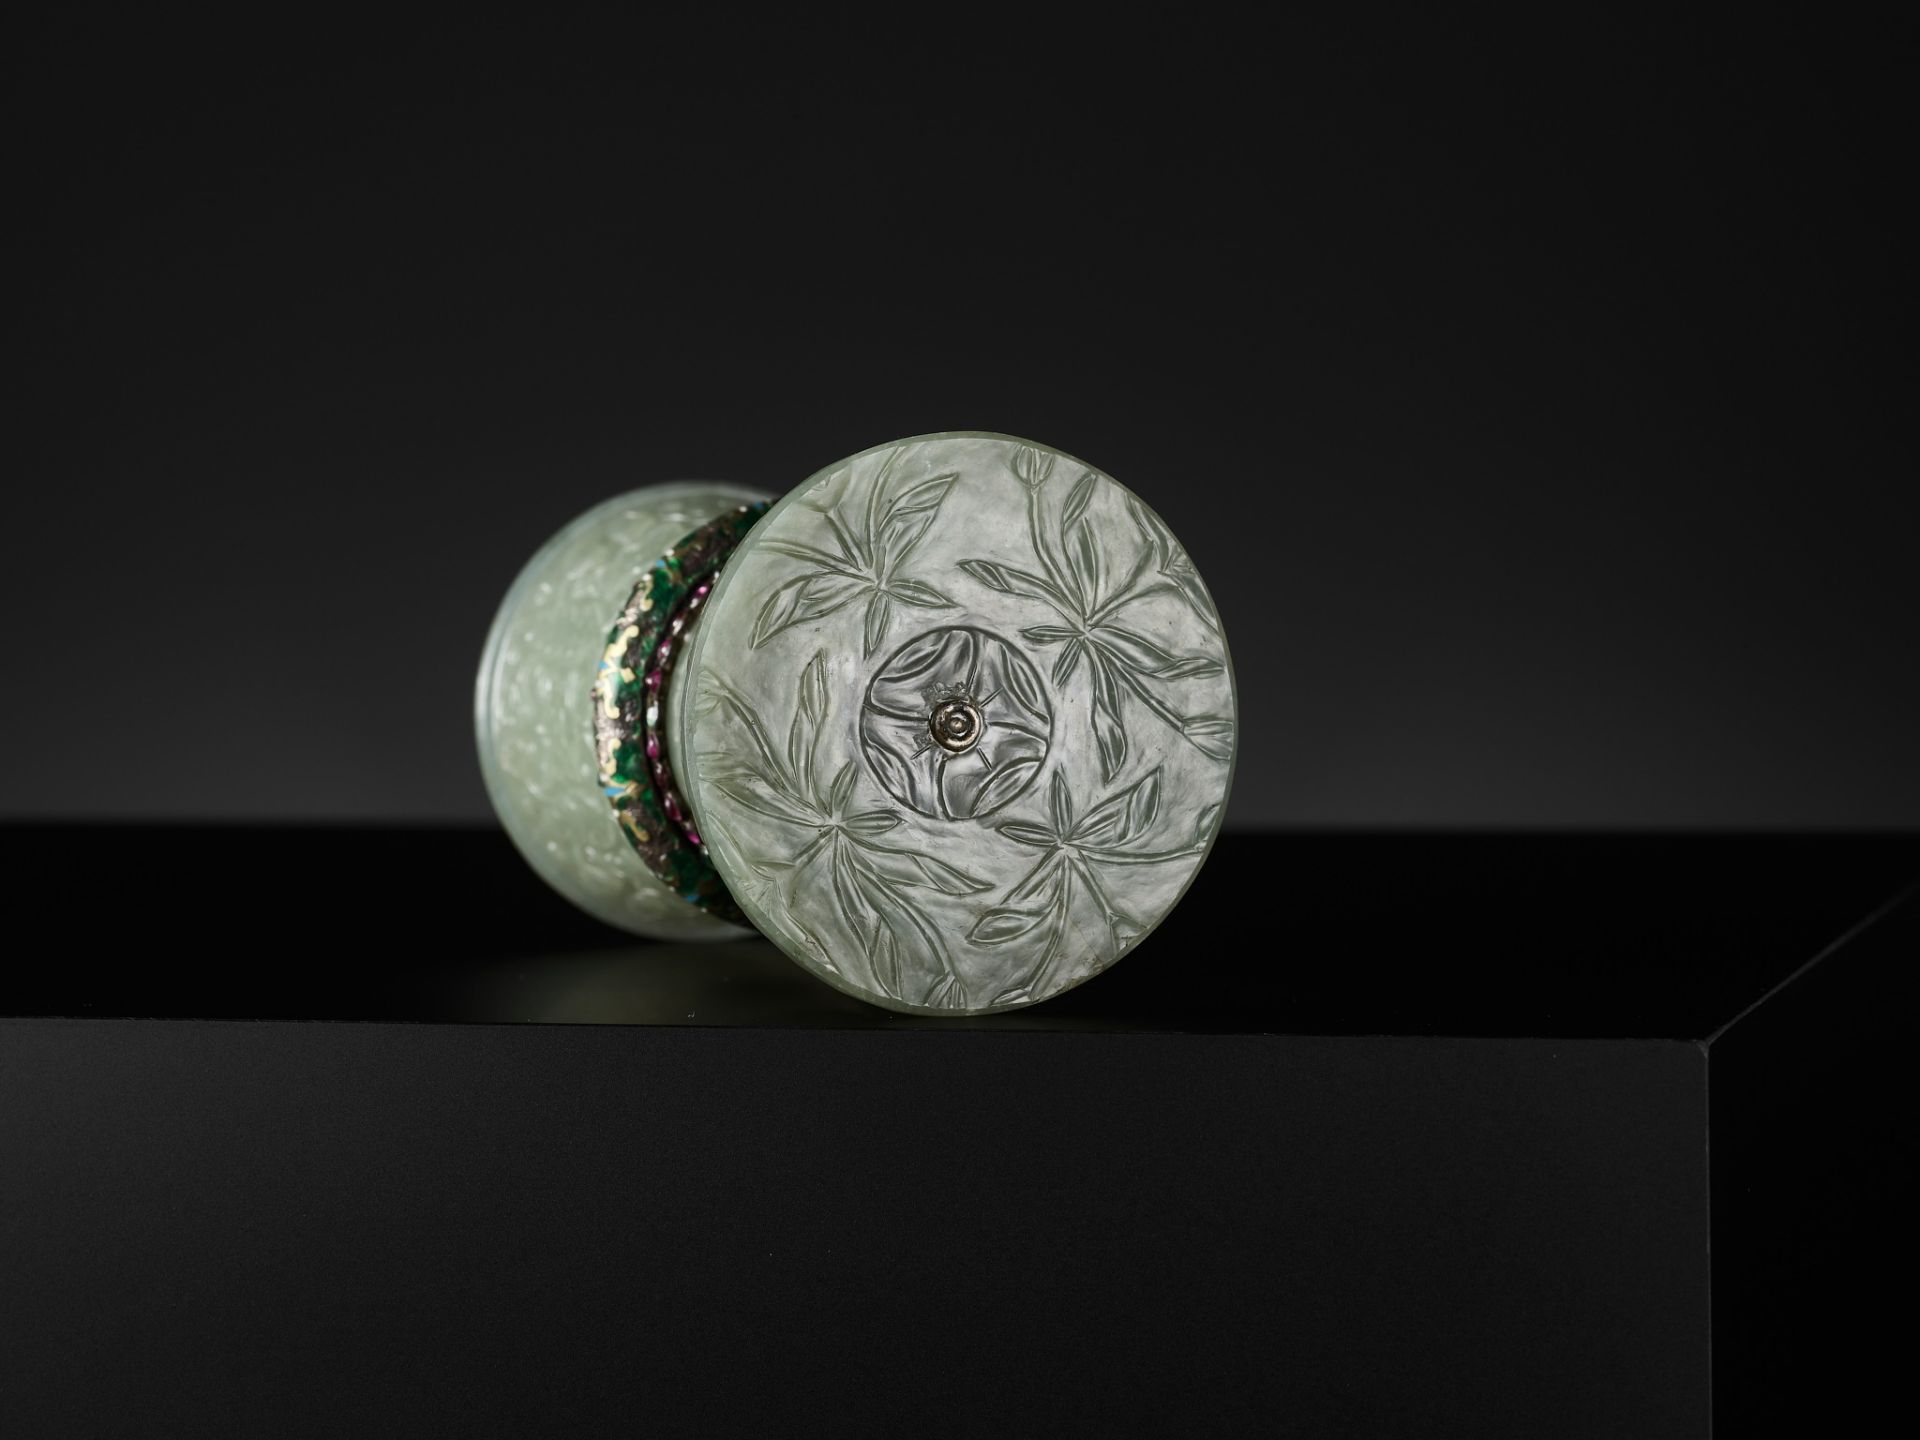 A MUGHAL GILT AND 'GEM'-INLAID JADE STEM CUP, INDIA, 18TH CENTURY - Image 9 of 11